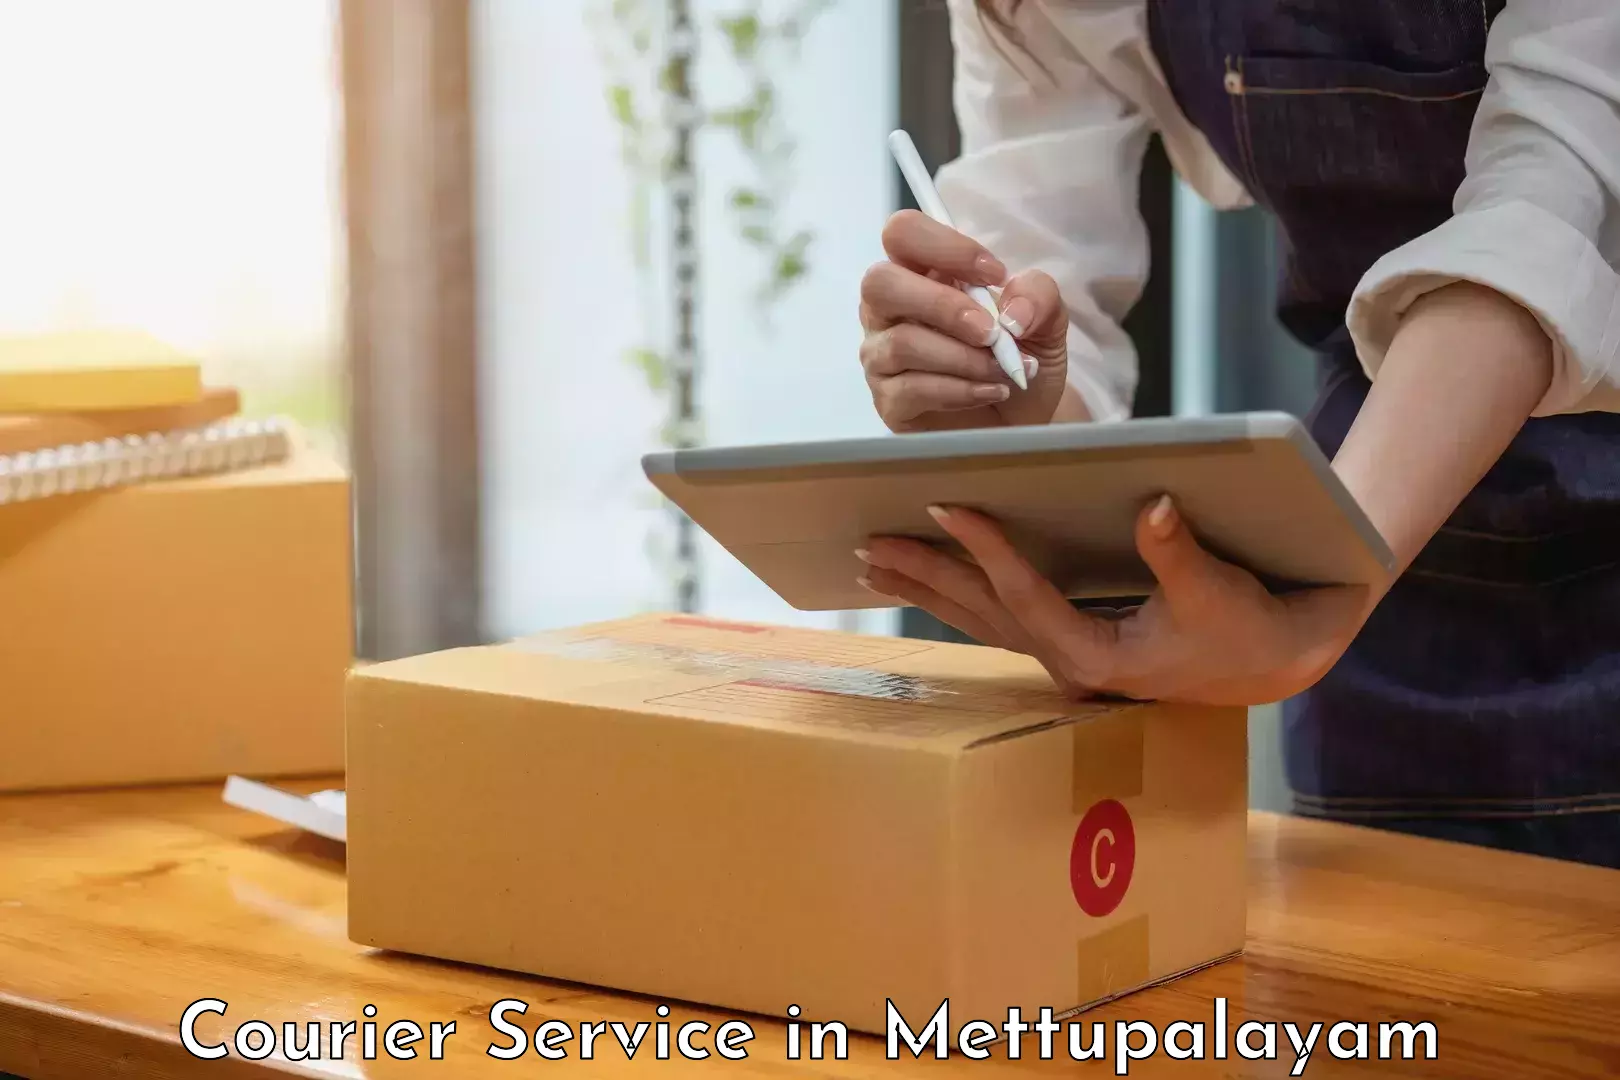 Courier service partnerships in Mettupalayam